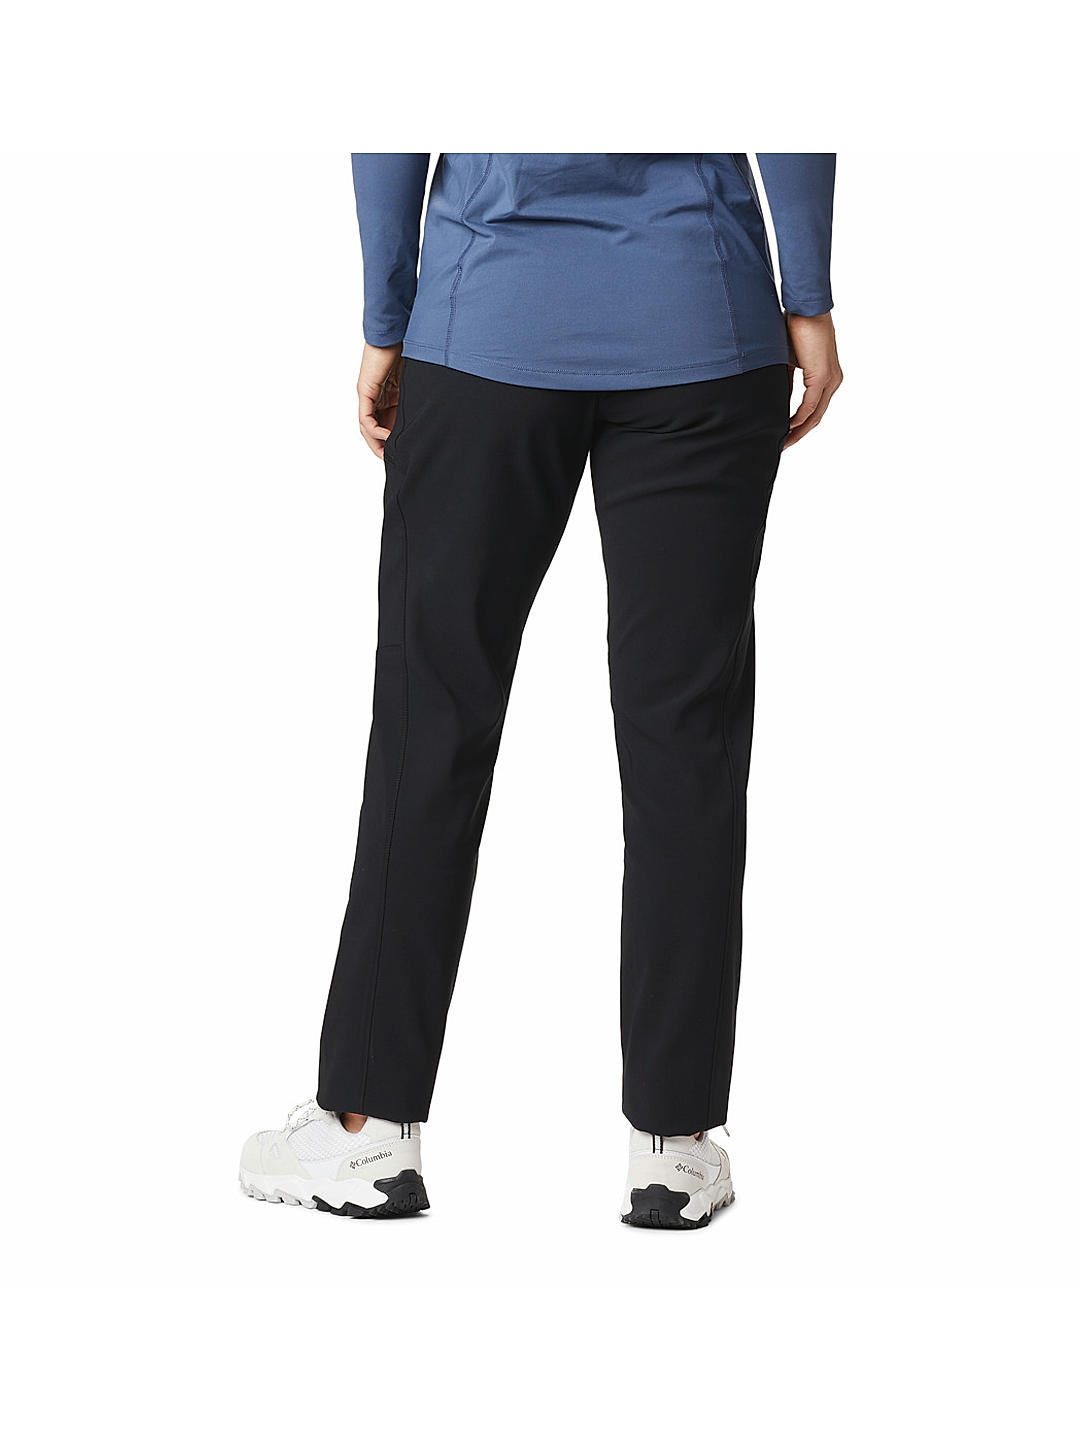 Buy Anytime Outdoor Boot Cut Pant for Women Online at Columbia